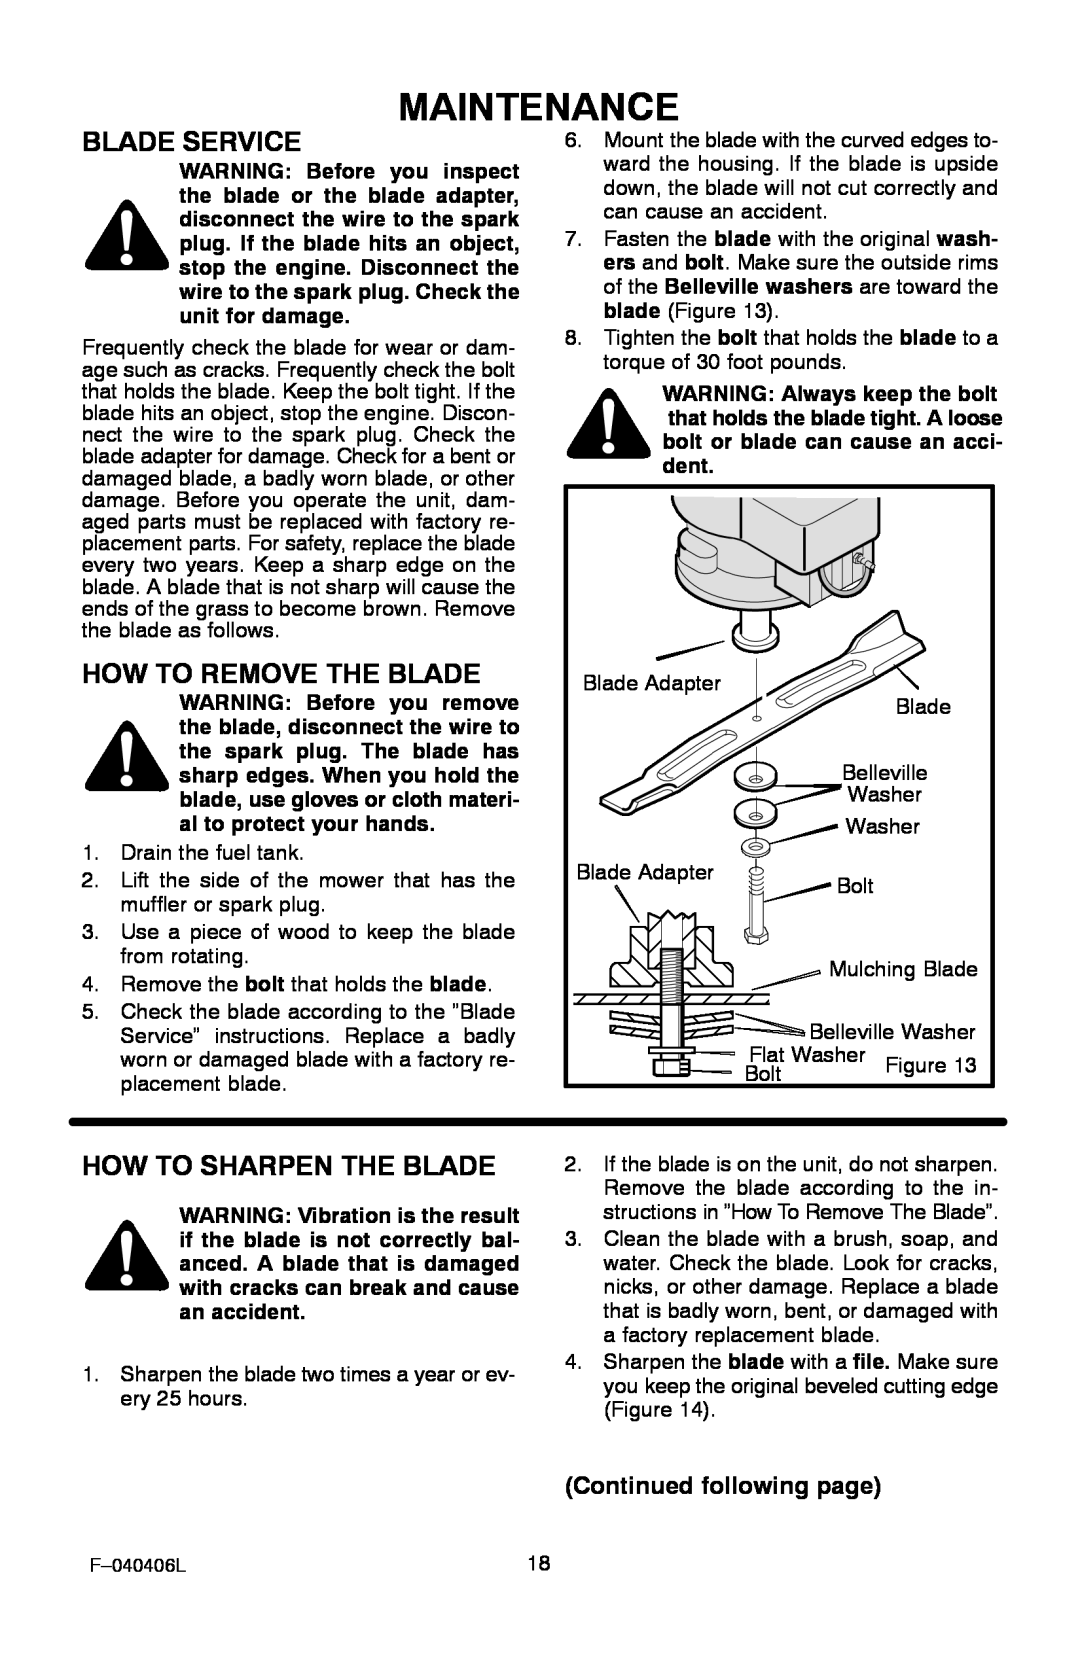 Murray 20-inch Maintenance, Blade Service, How To Remove The Blade, How To Sharpen The Blade, Continued following page 